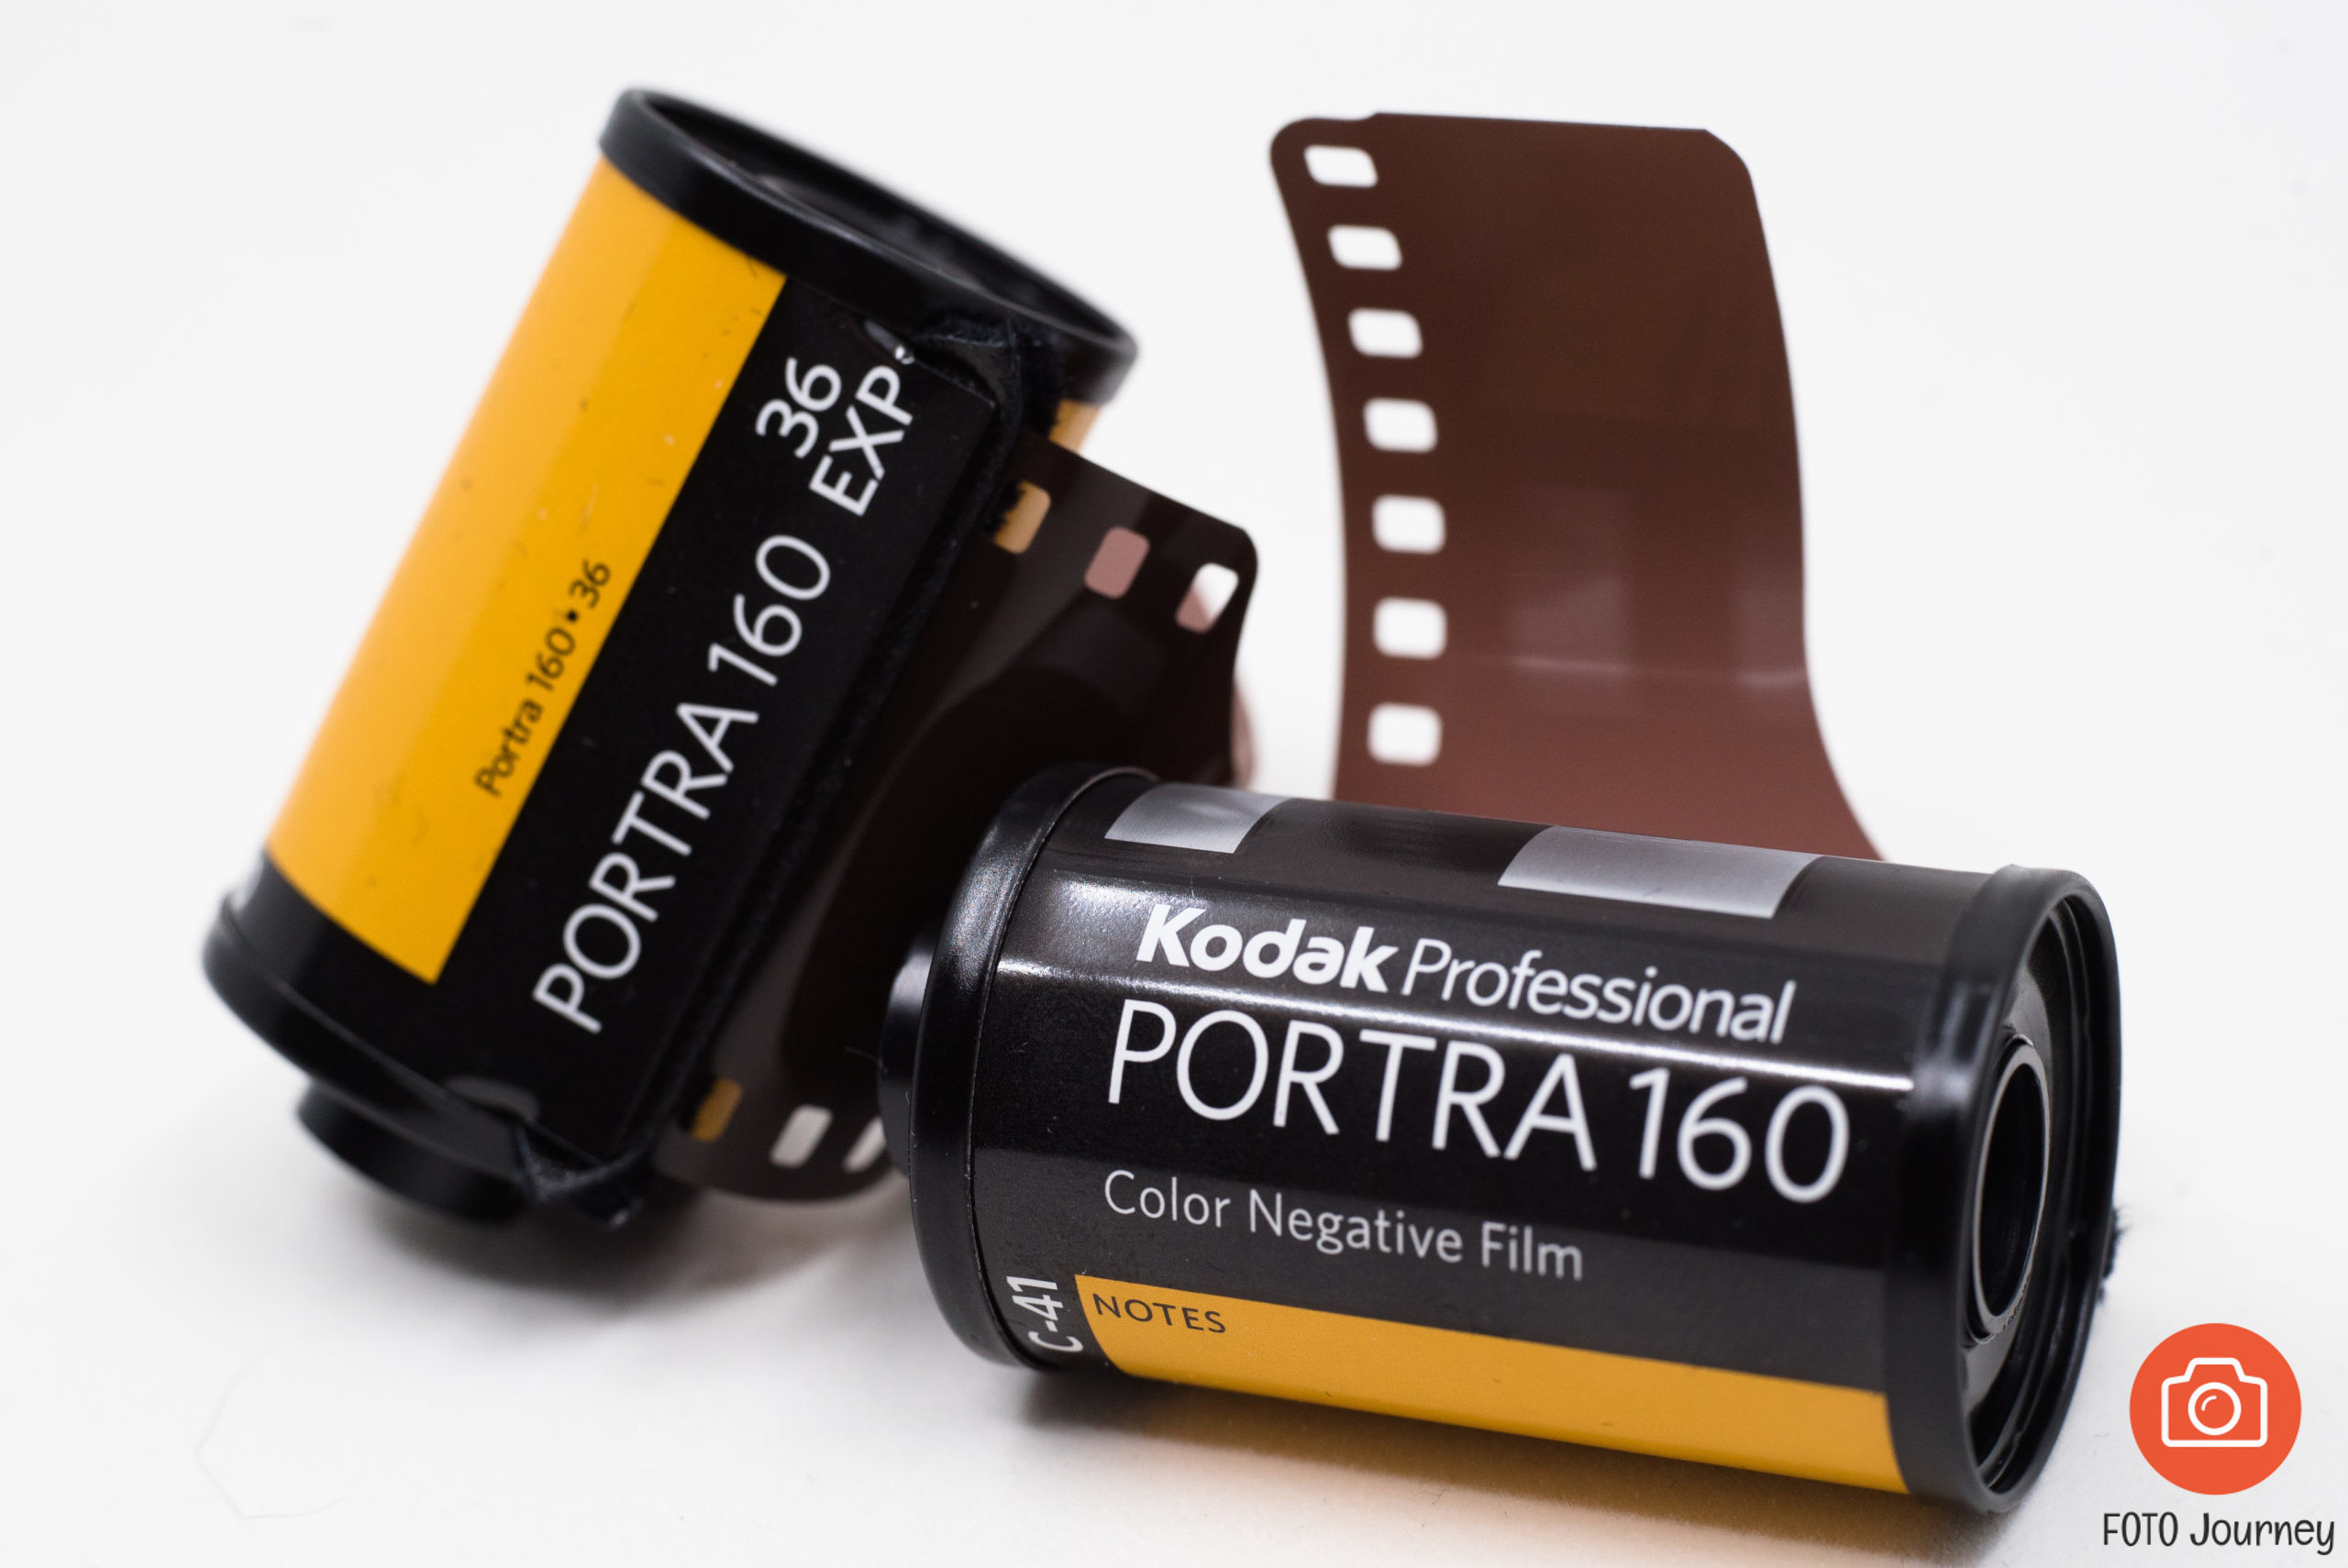 7 Kodak Portra 160 review - My Foto Journey My review of the